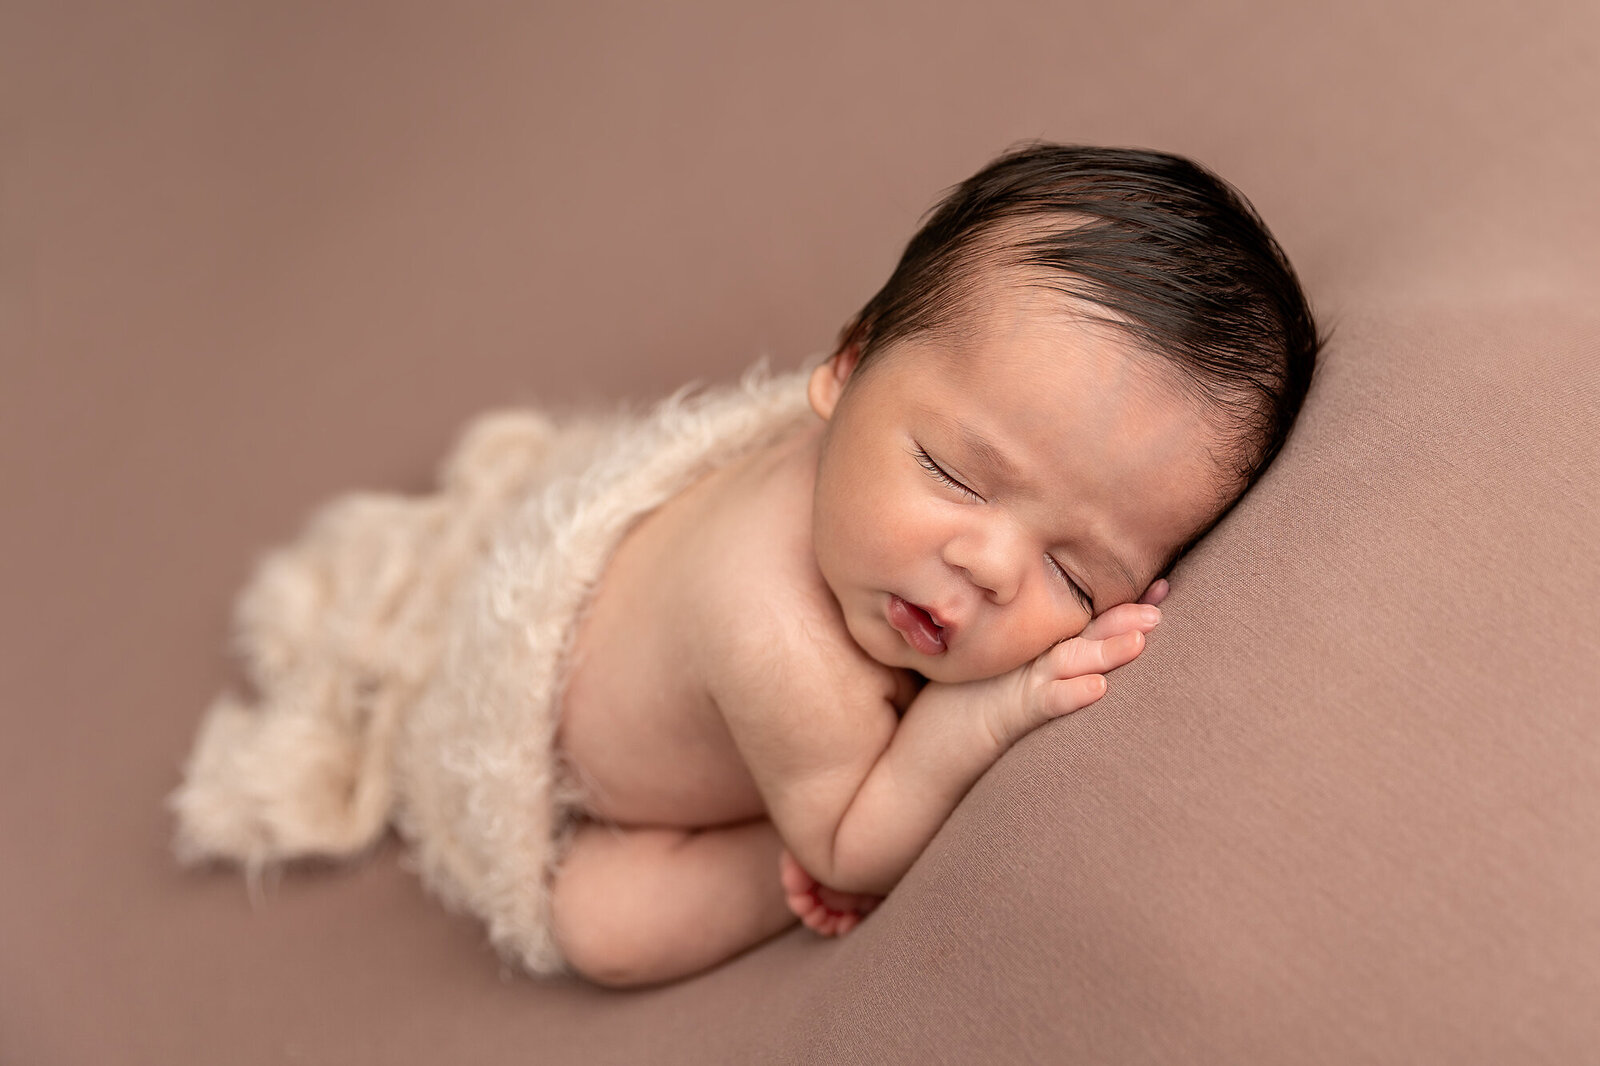 baby sleeping on brown background by Newborn Photography Bucks County PA